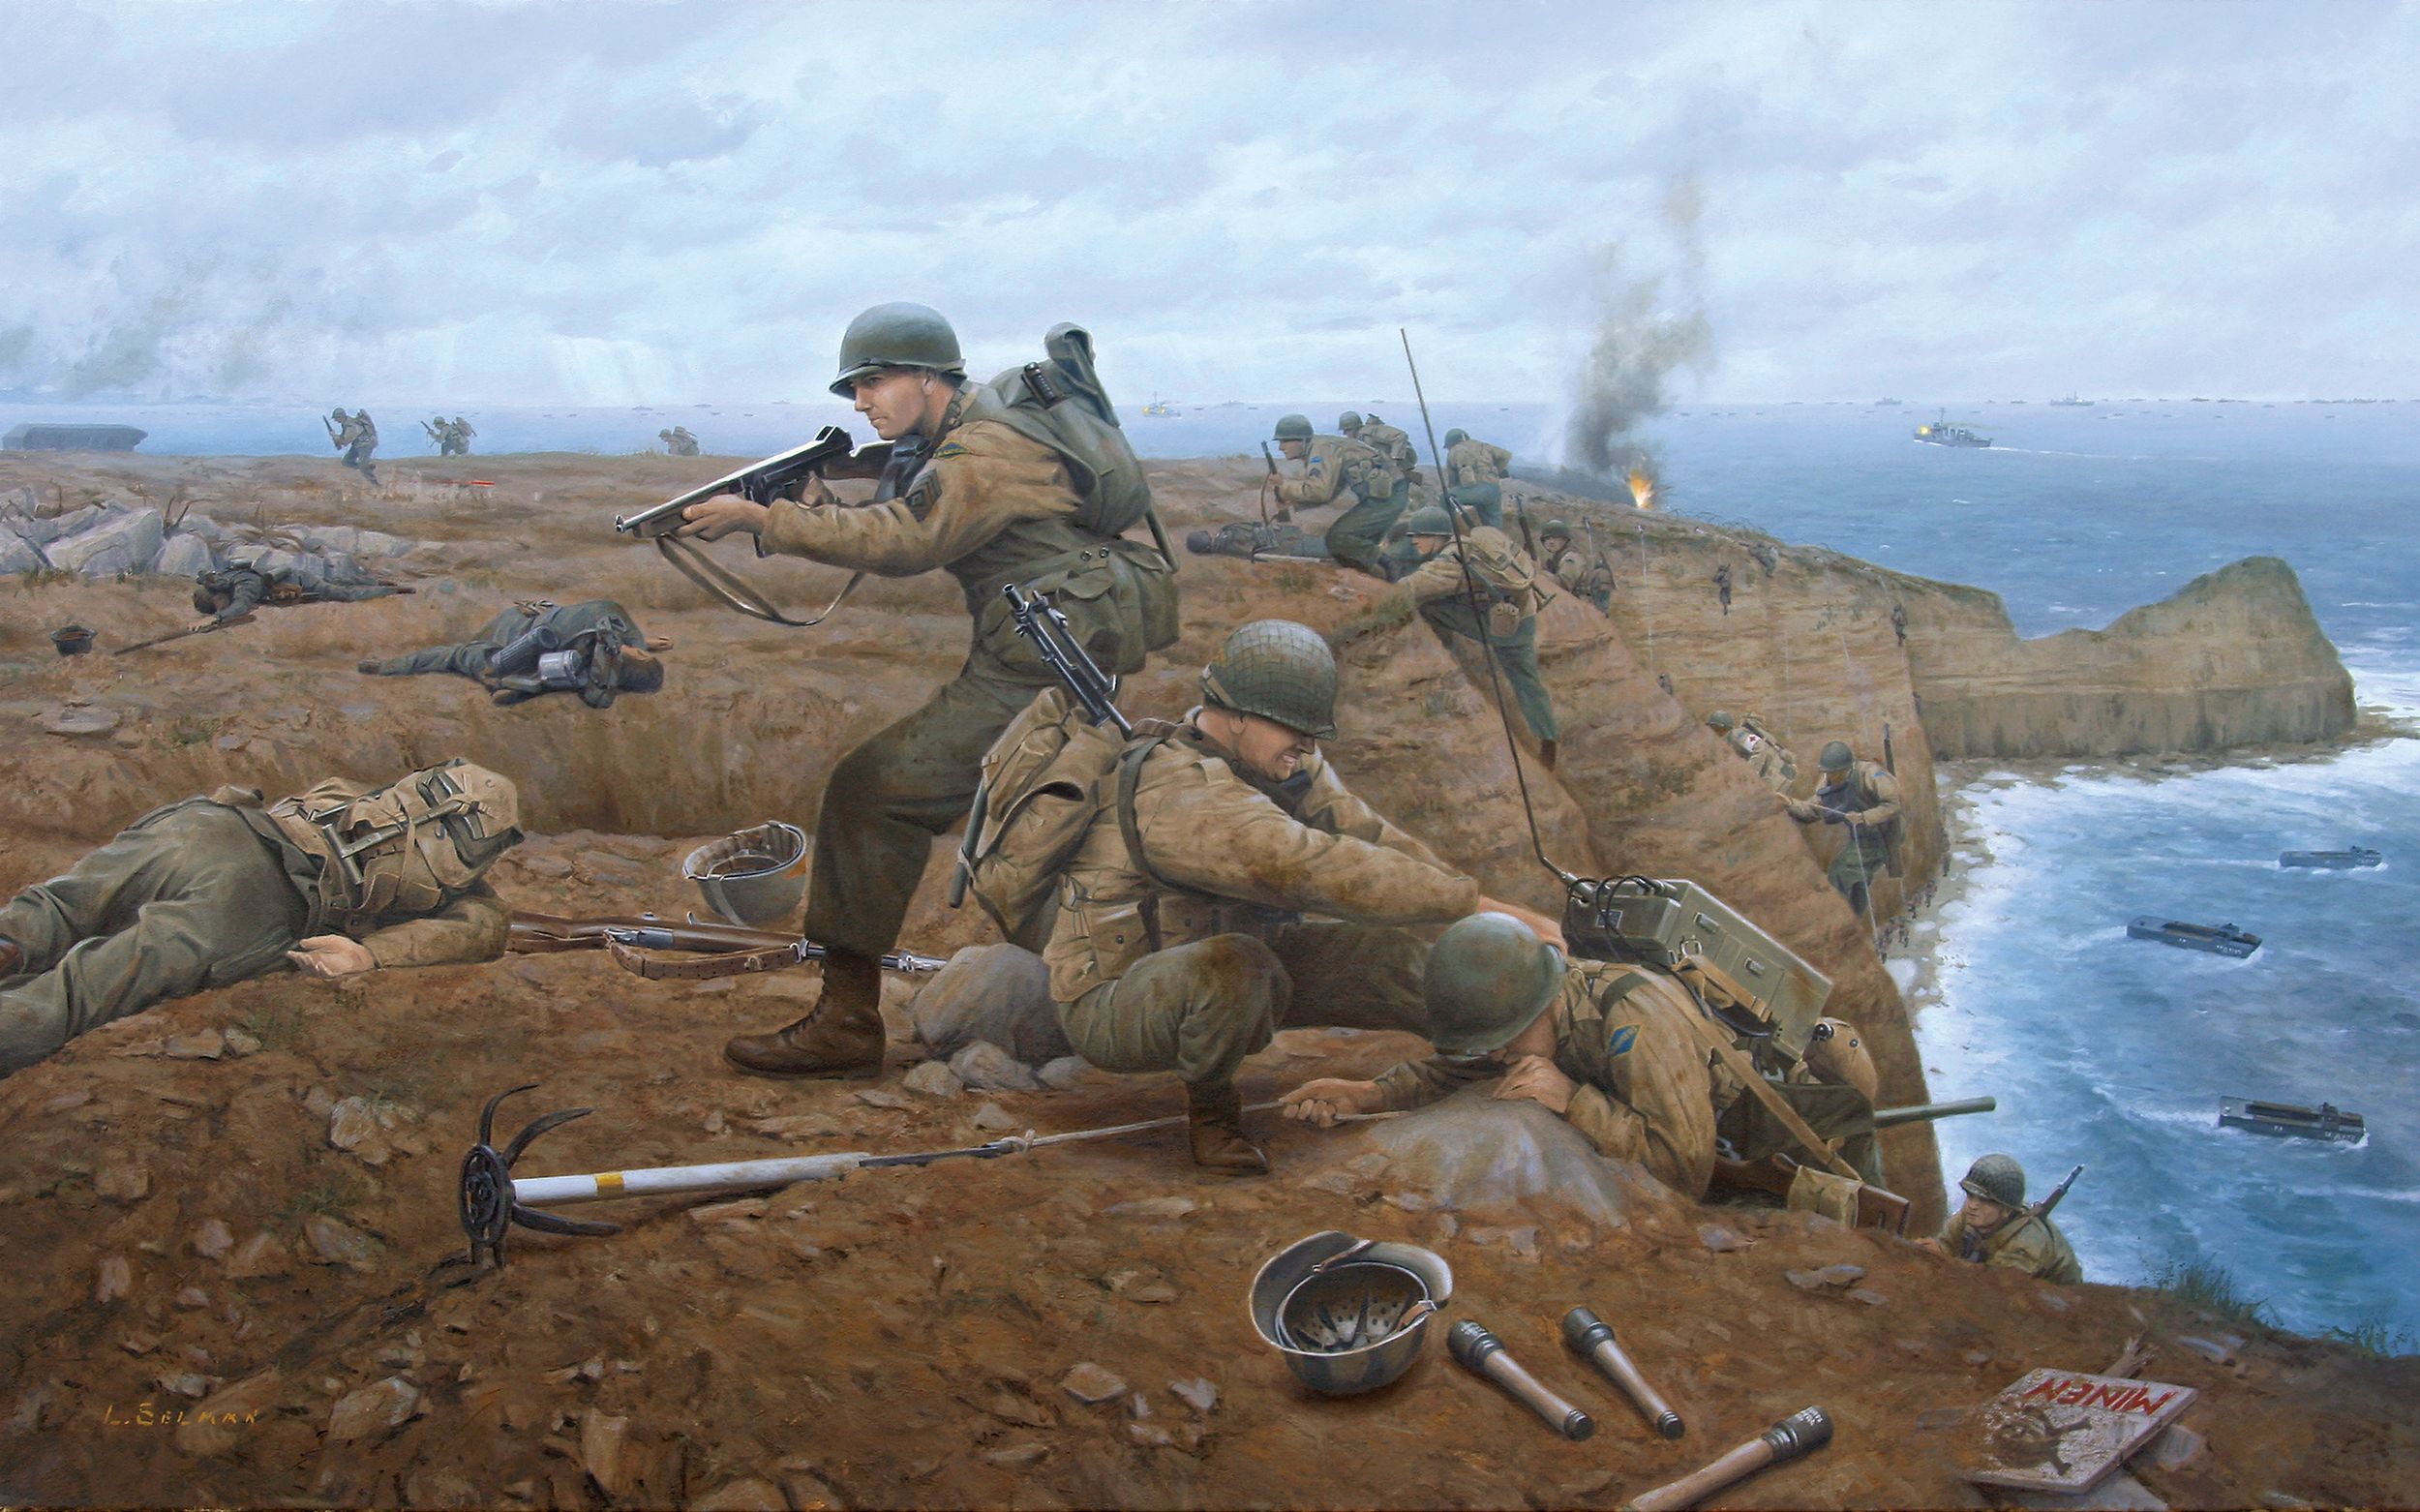 In his stark painting titled The Point, artist Larry Selman captures the drama as Rangers of the 2nd Battalion reach the summit of Pointe du Hoc on D-Day.